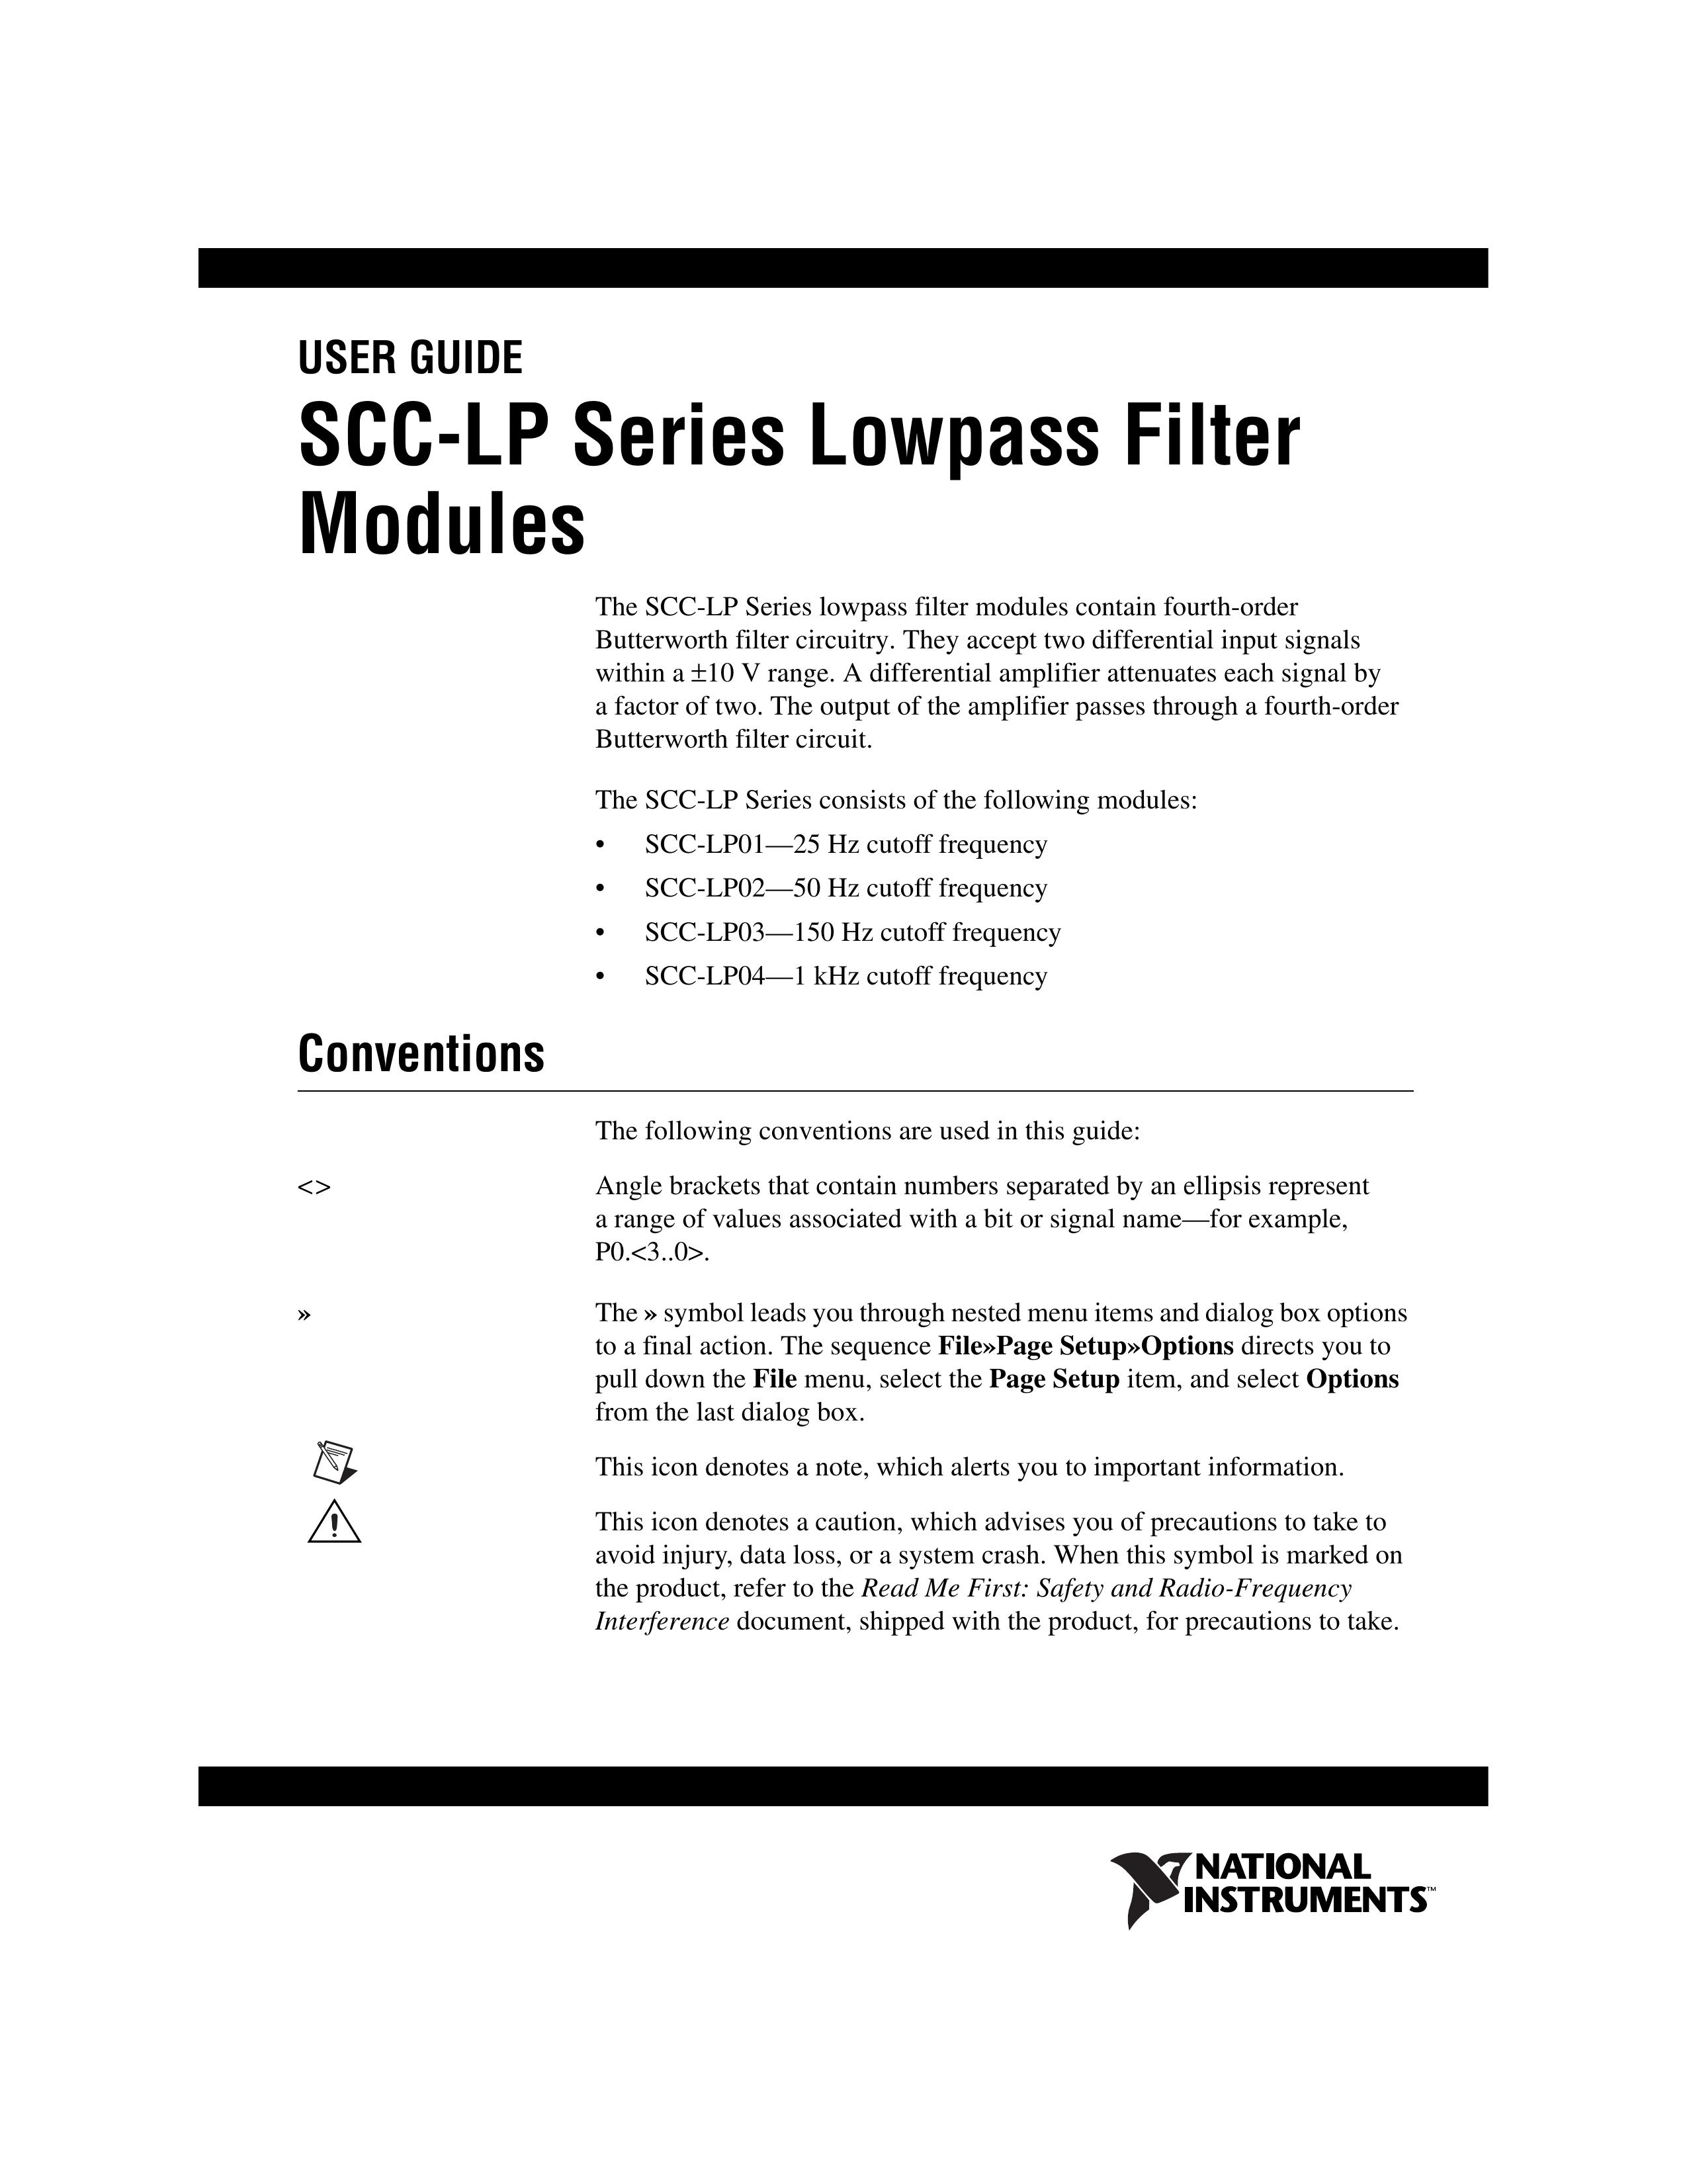 National Instruments SCC-LP04 Dryer Accessories User Manual (Page 1)